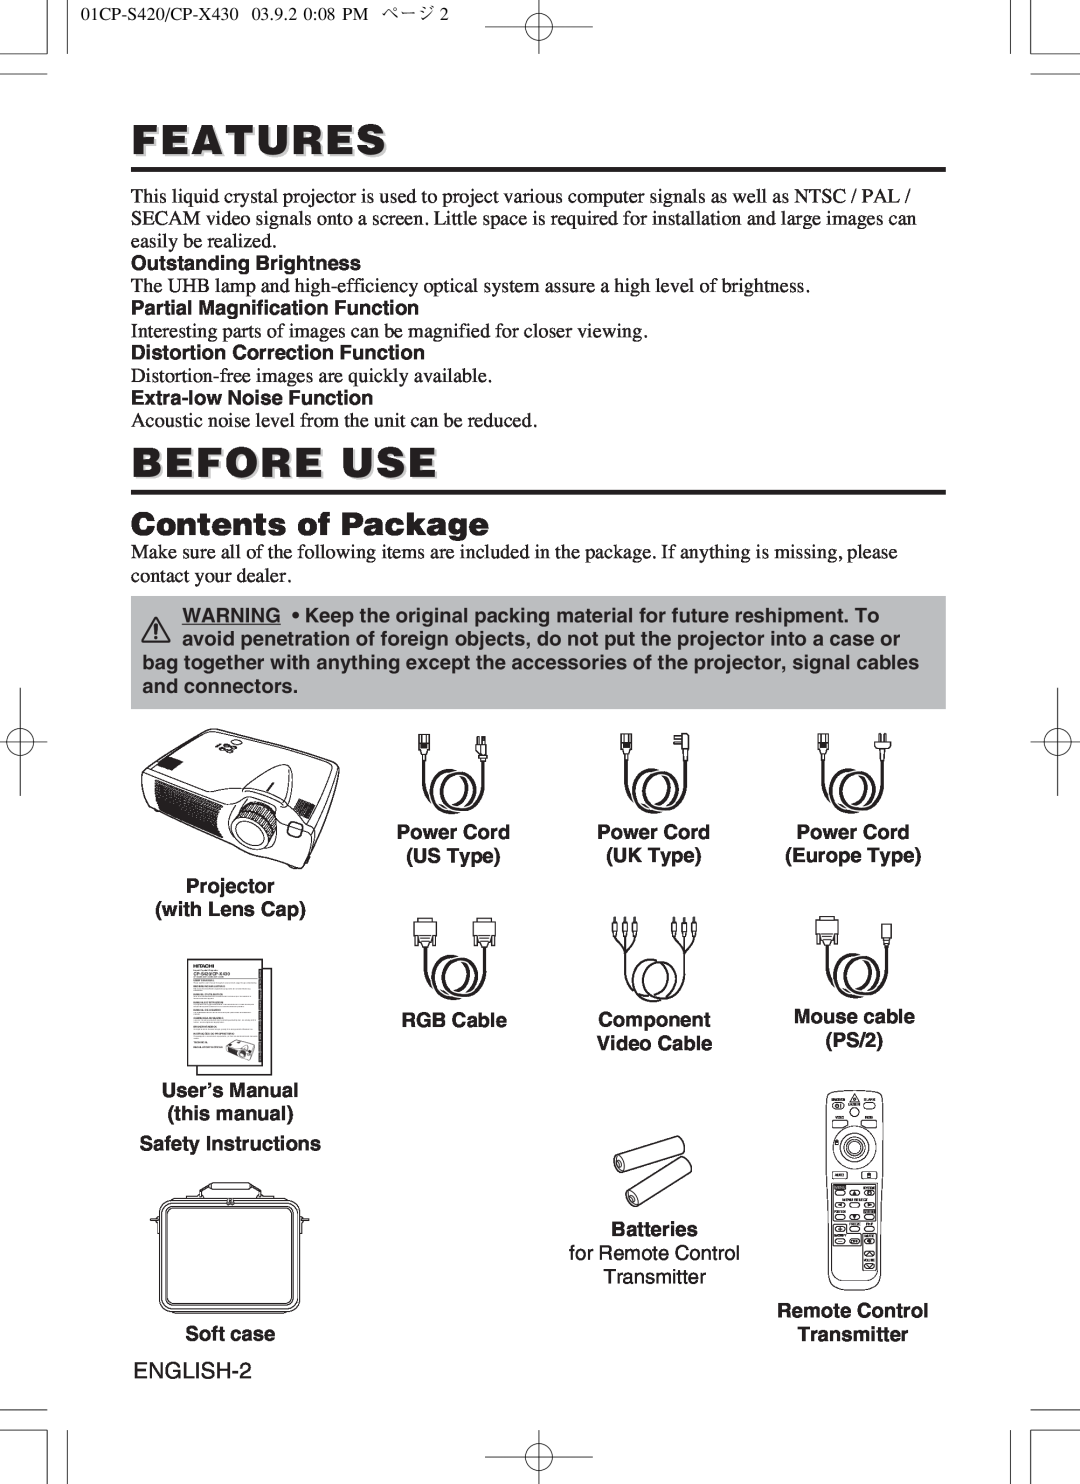 Hitachi CP-S420WA, CP-X430WA user manual Features, Before Use, Contents of Package 